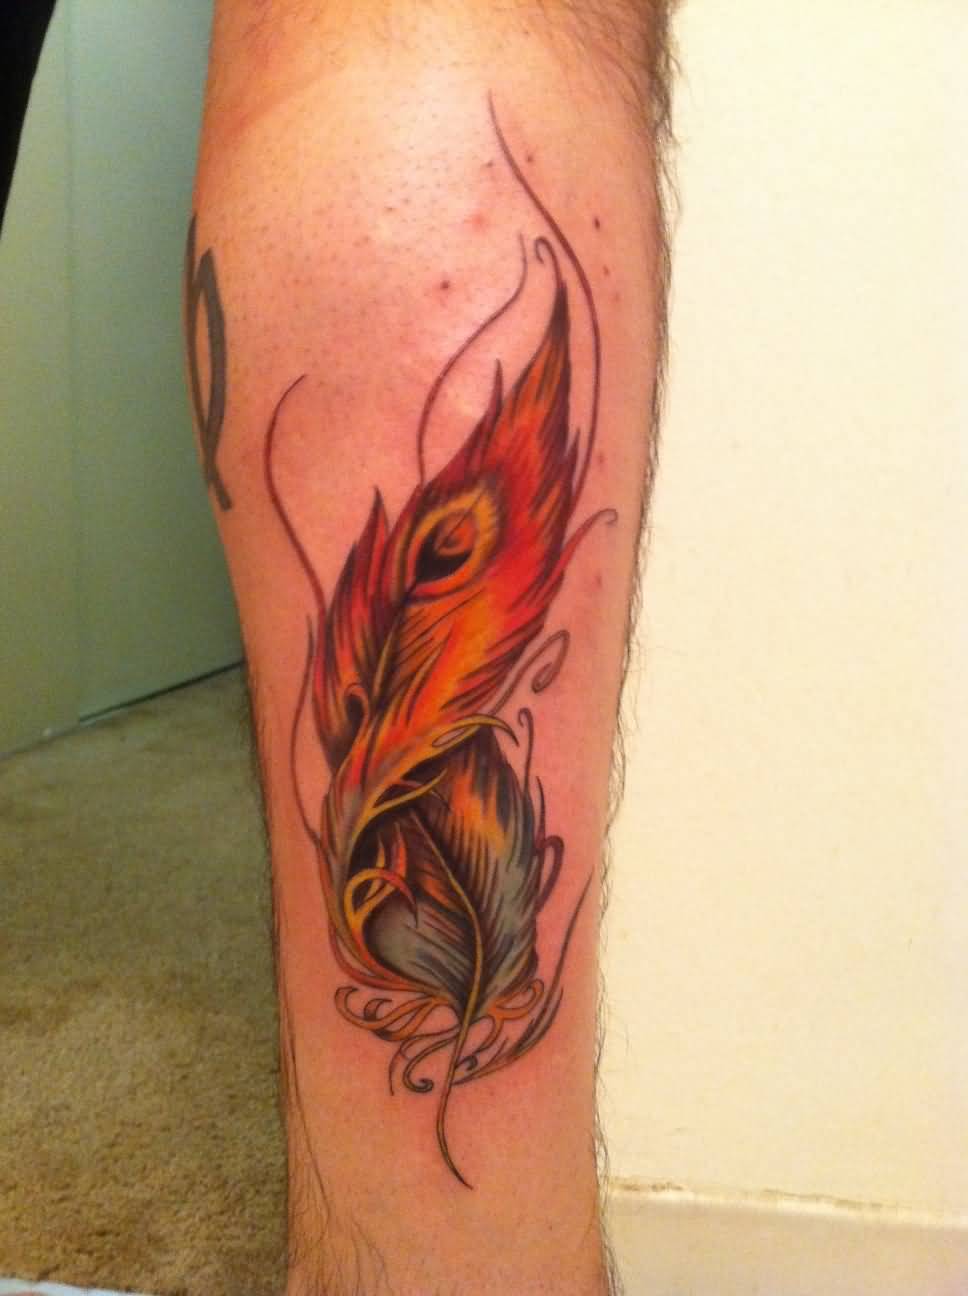 Cool Phoenix Feather Tattoo Design For Forearm